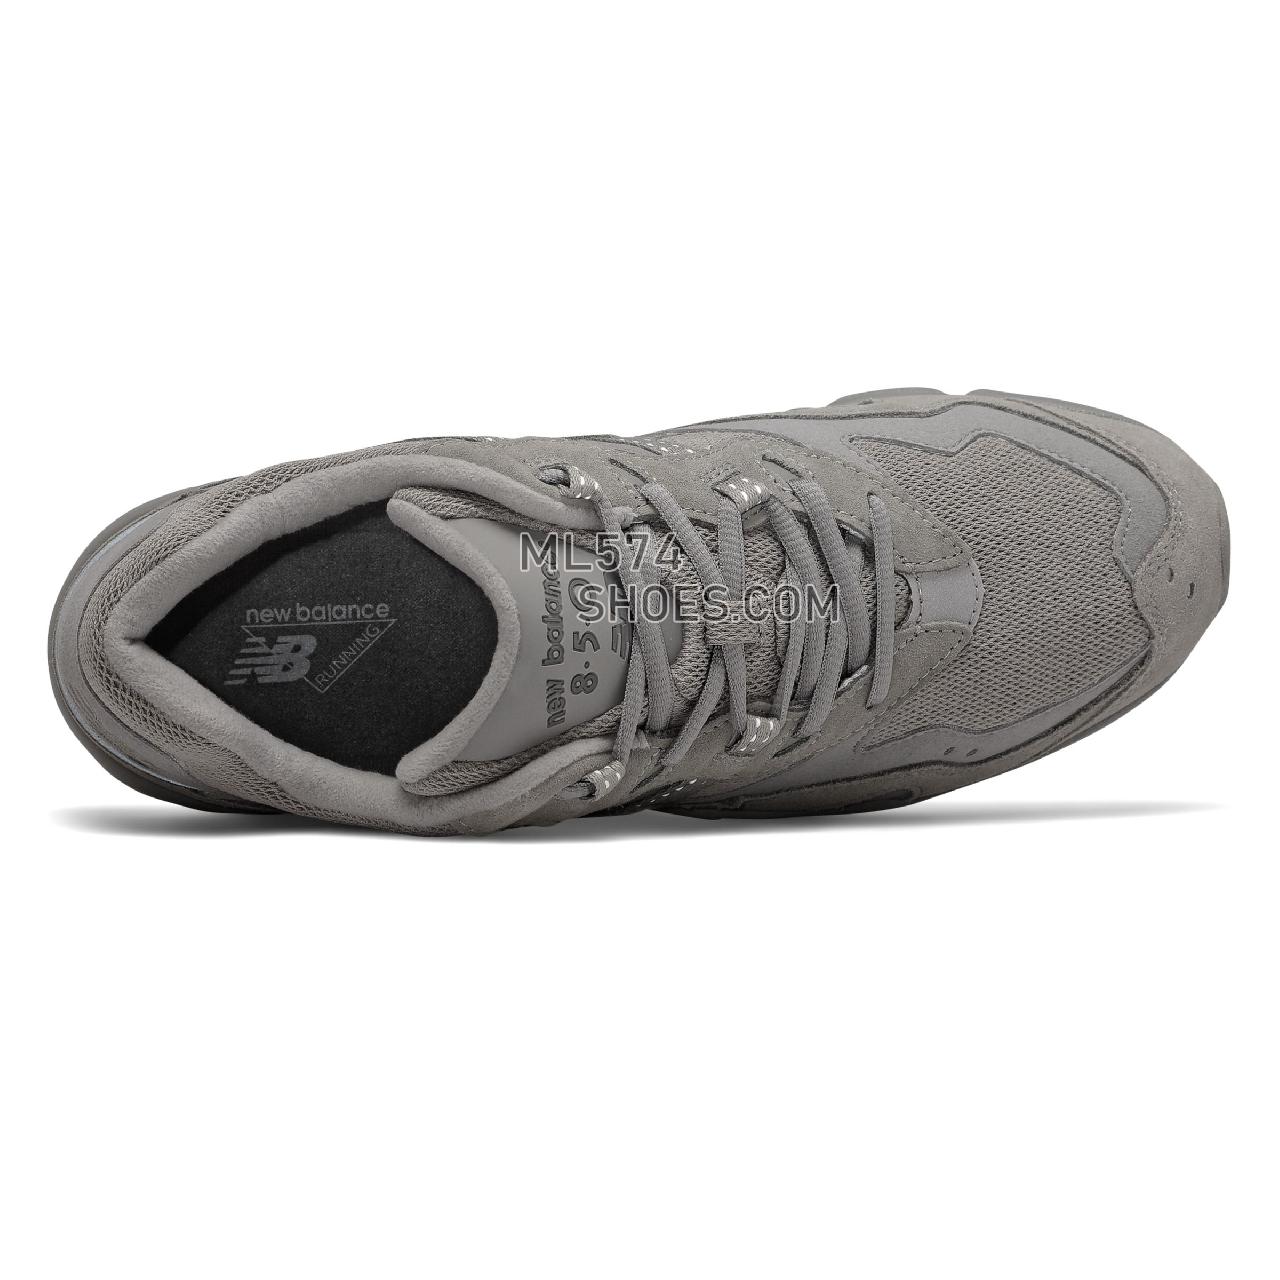 New Balance 850 - Men's Classic Sneakers - Marblehead with Grey - ML850CF